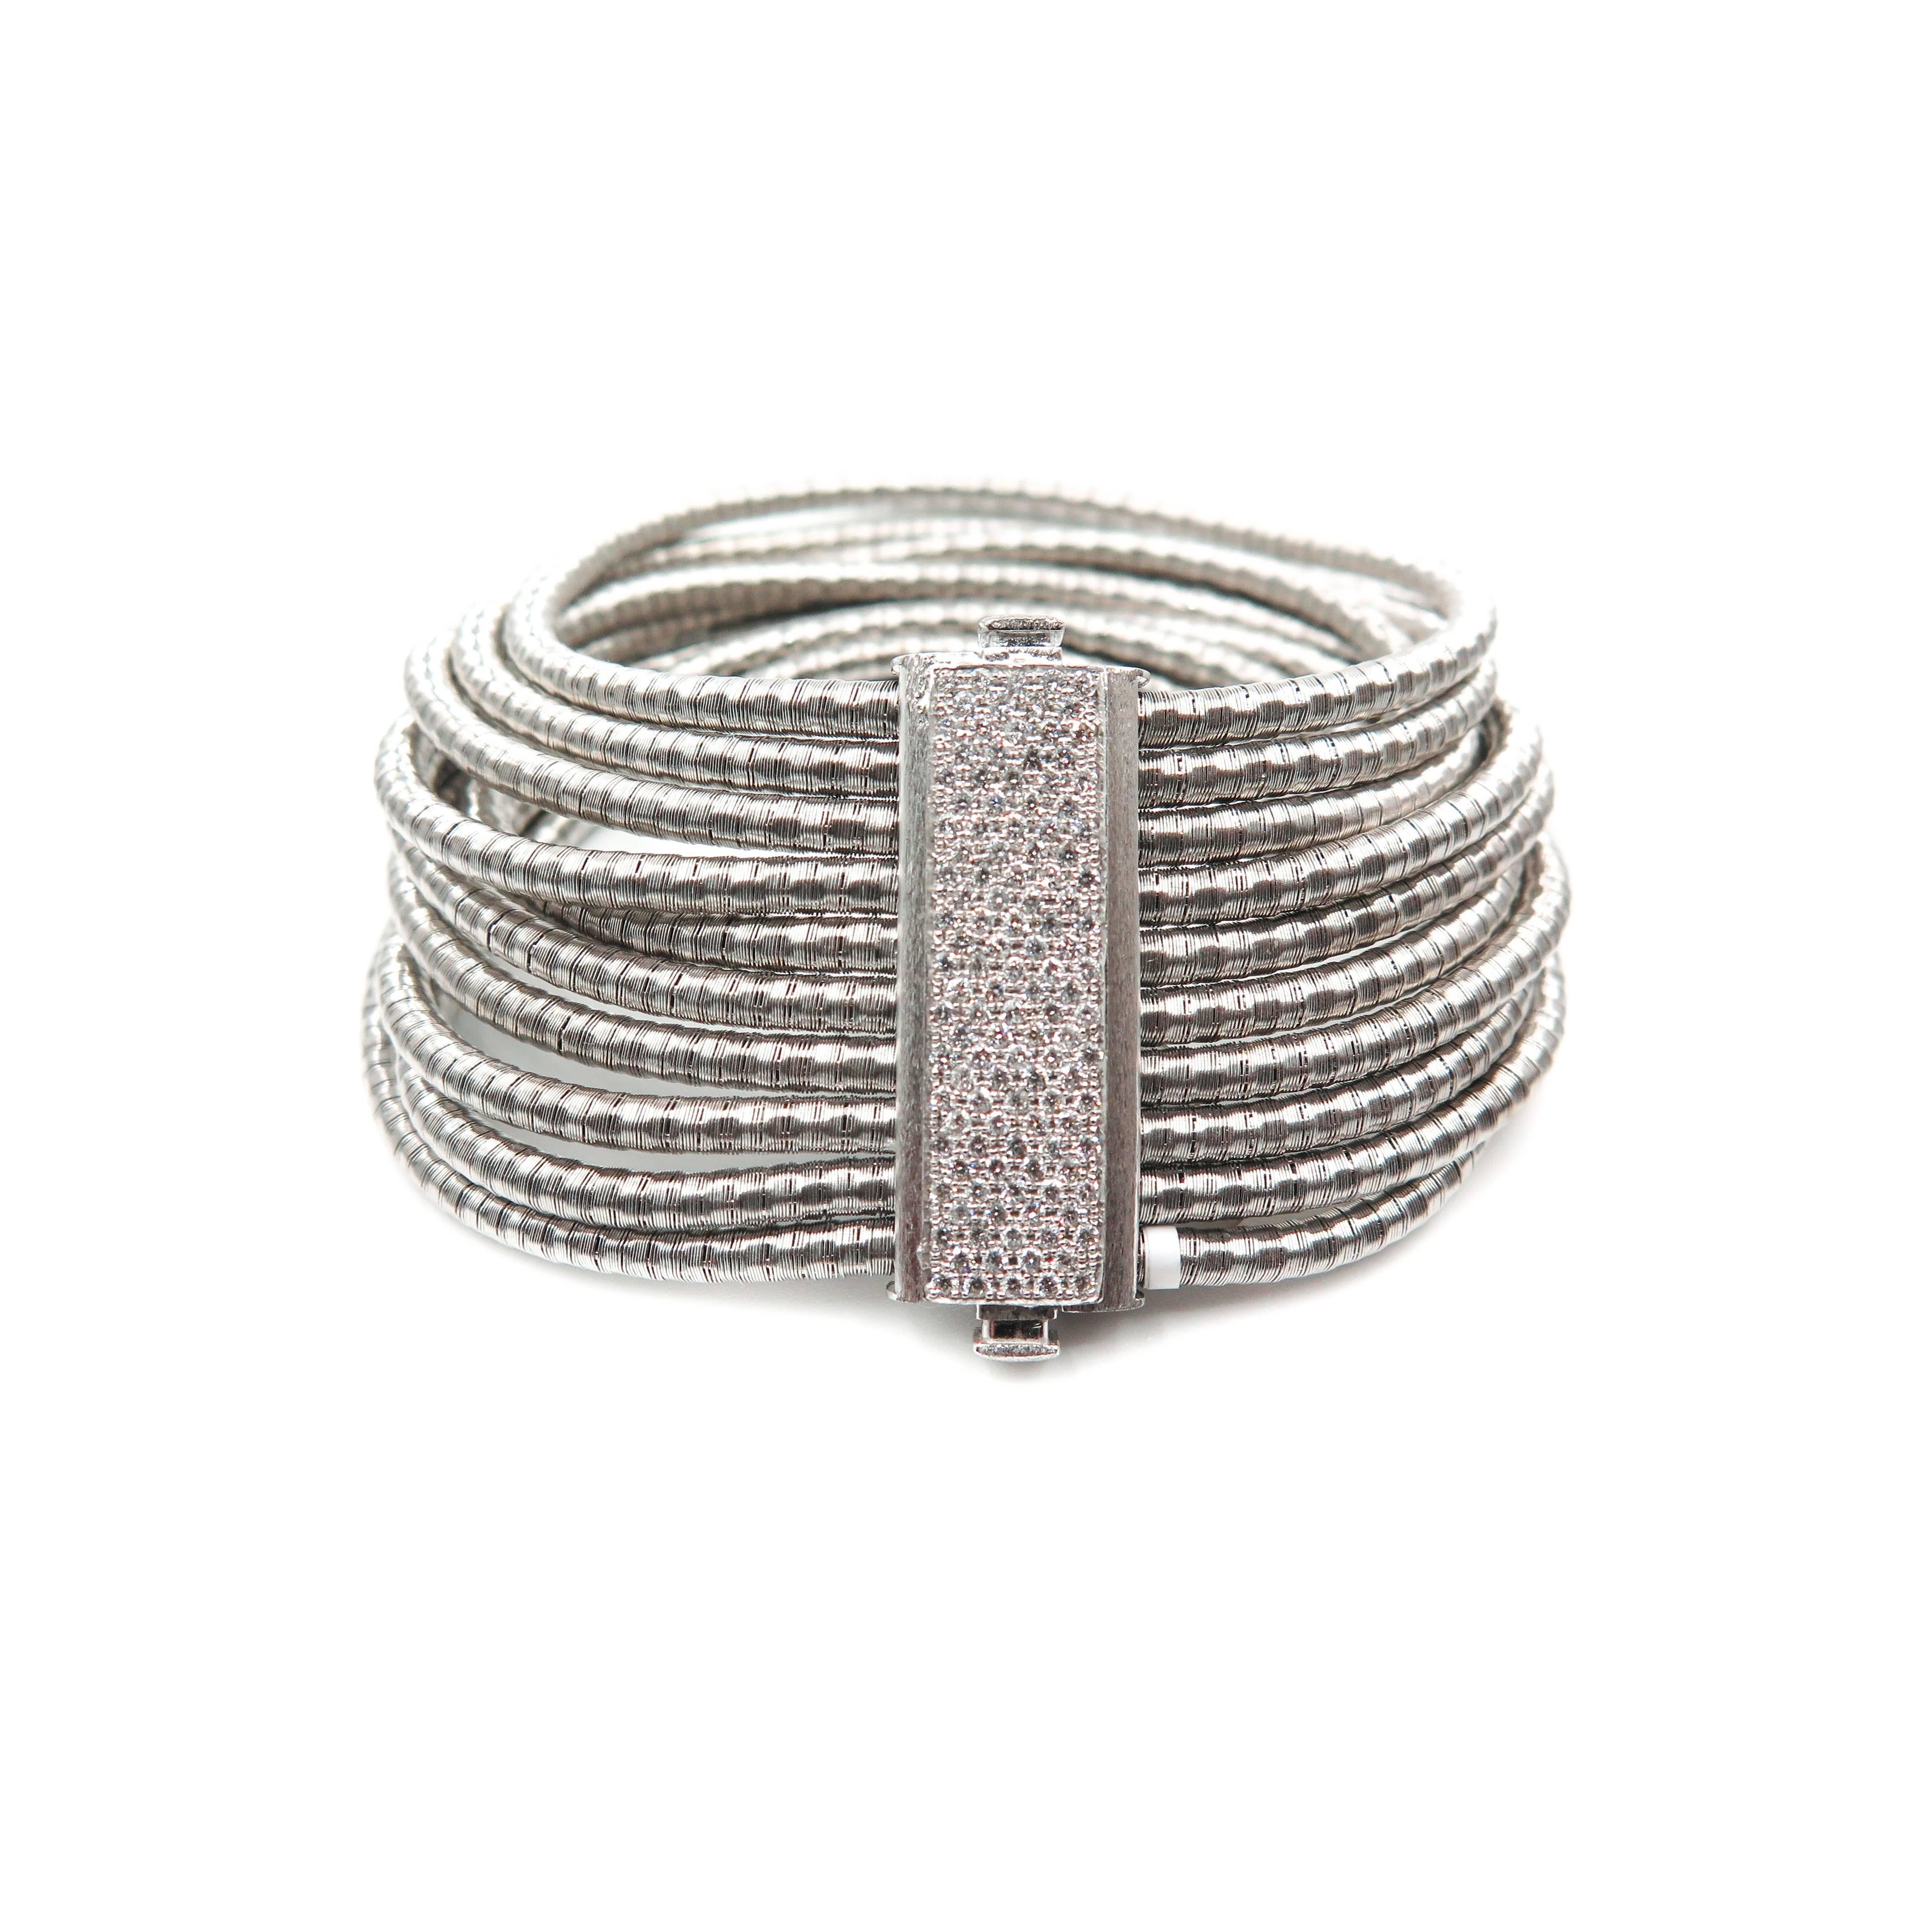 Experience and feel the softness of this gorgeous bracelet, designed by layering 10 individual strands of solid 18k white gold rounded links and finished with the beautiful detail of a magnificent diamond clasp.
Created by Yvel and expertly crafted